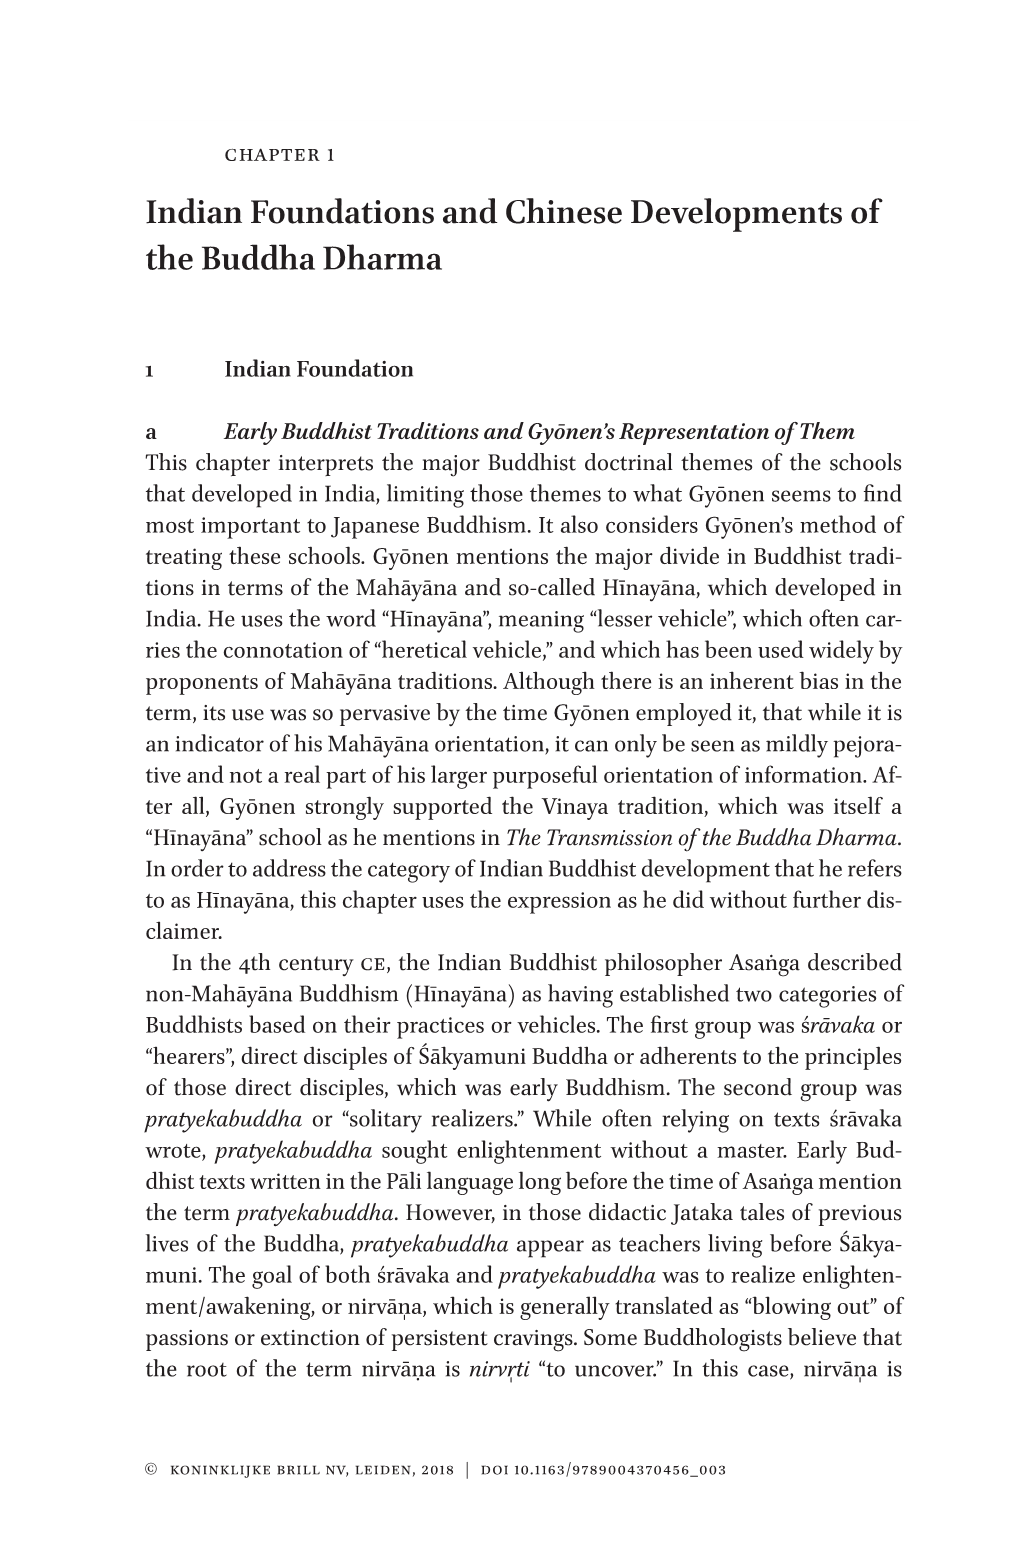 Indian Foundations and Chinese Developments of the Buddha Dharma